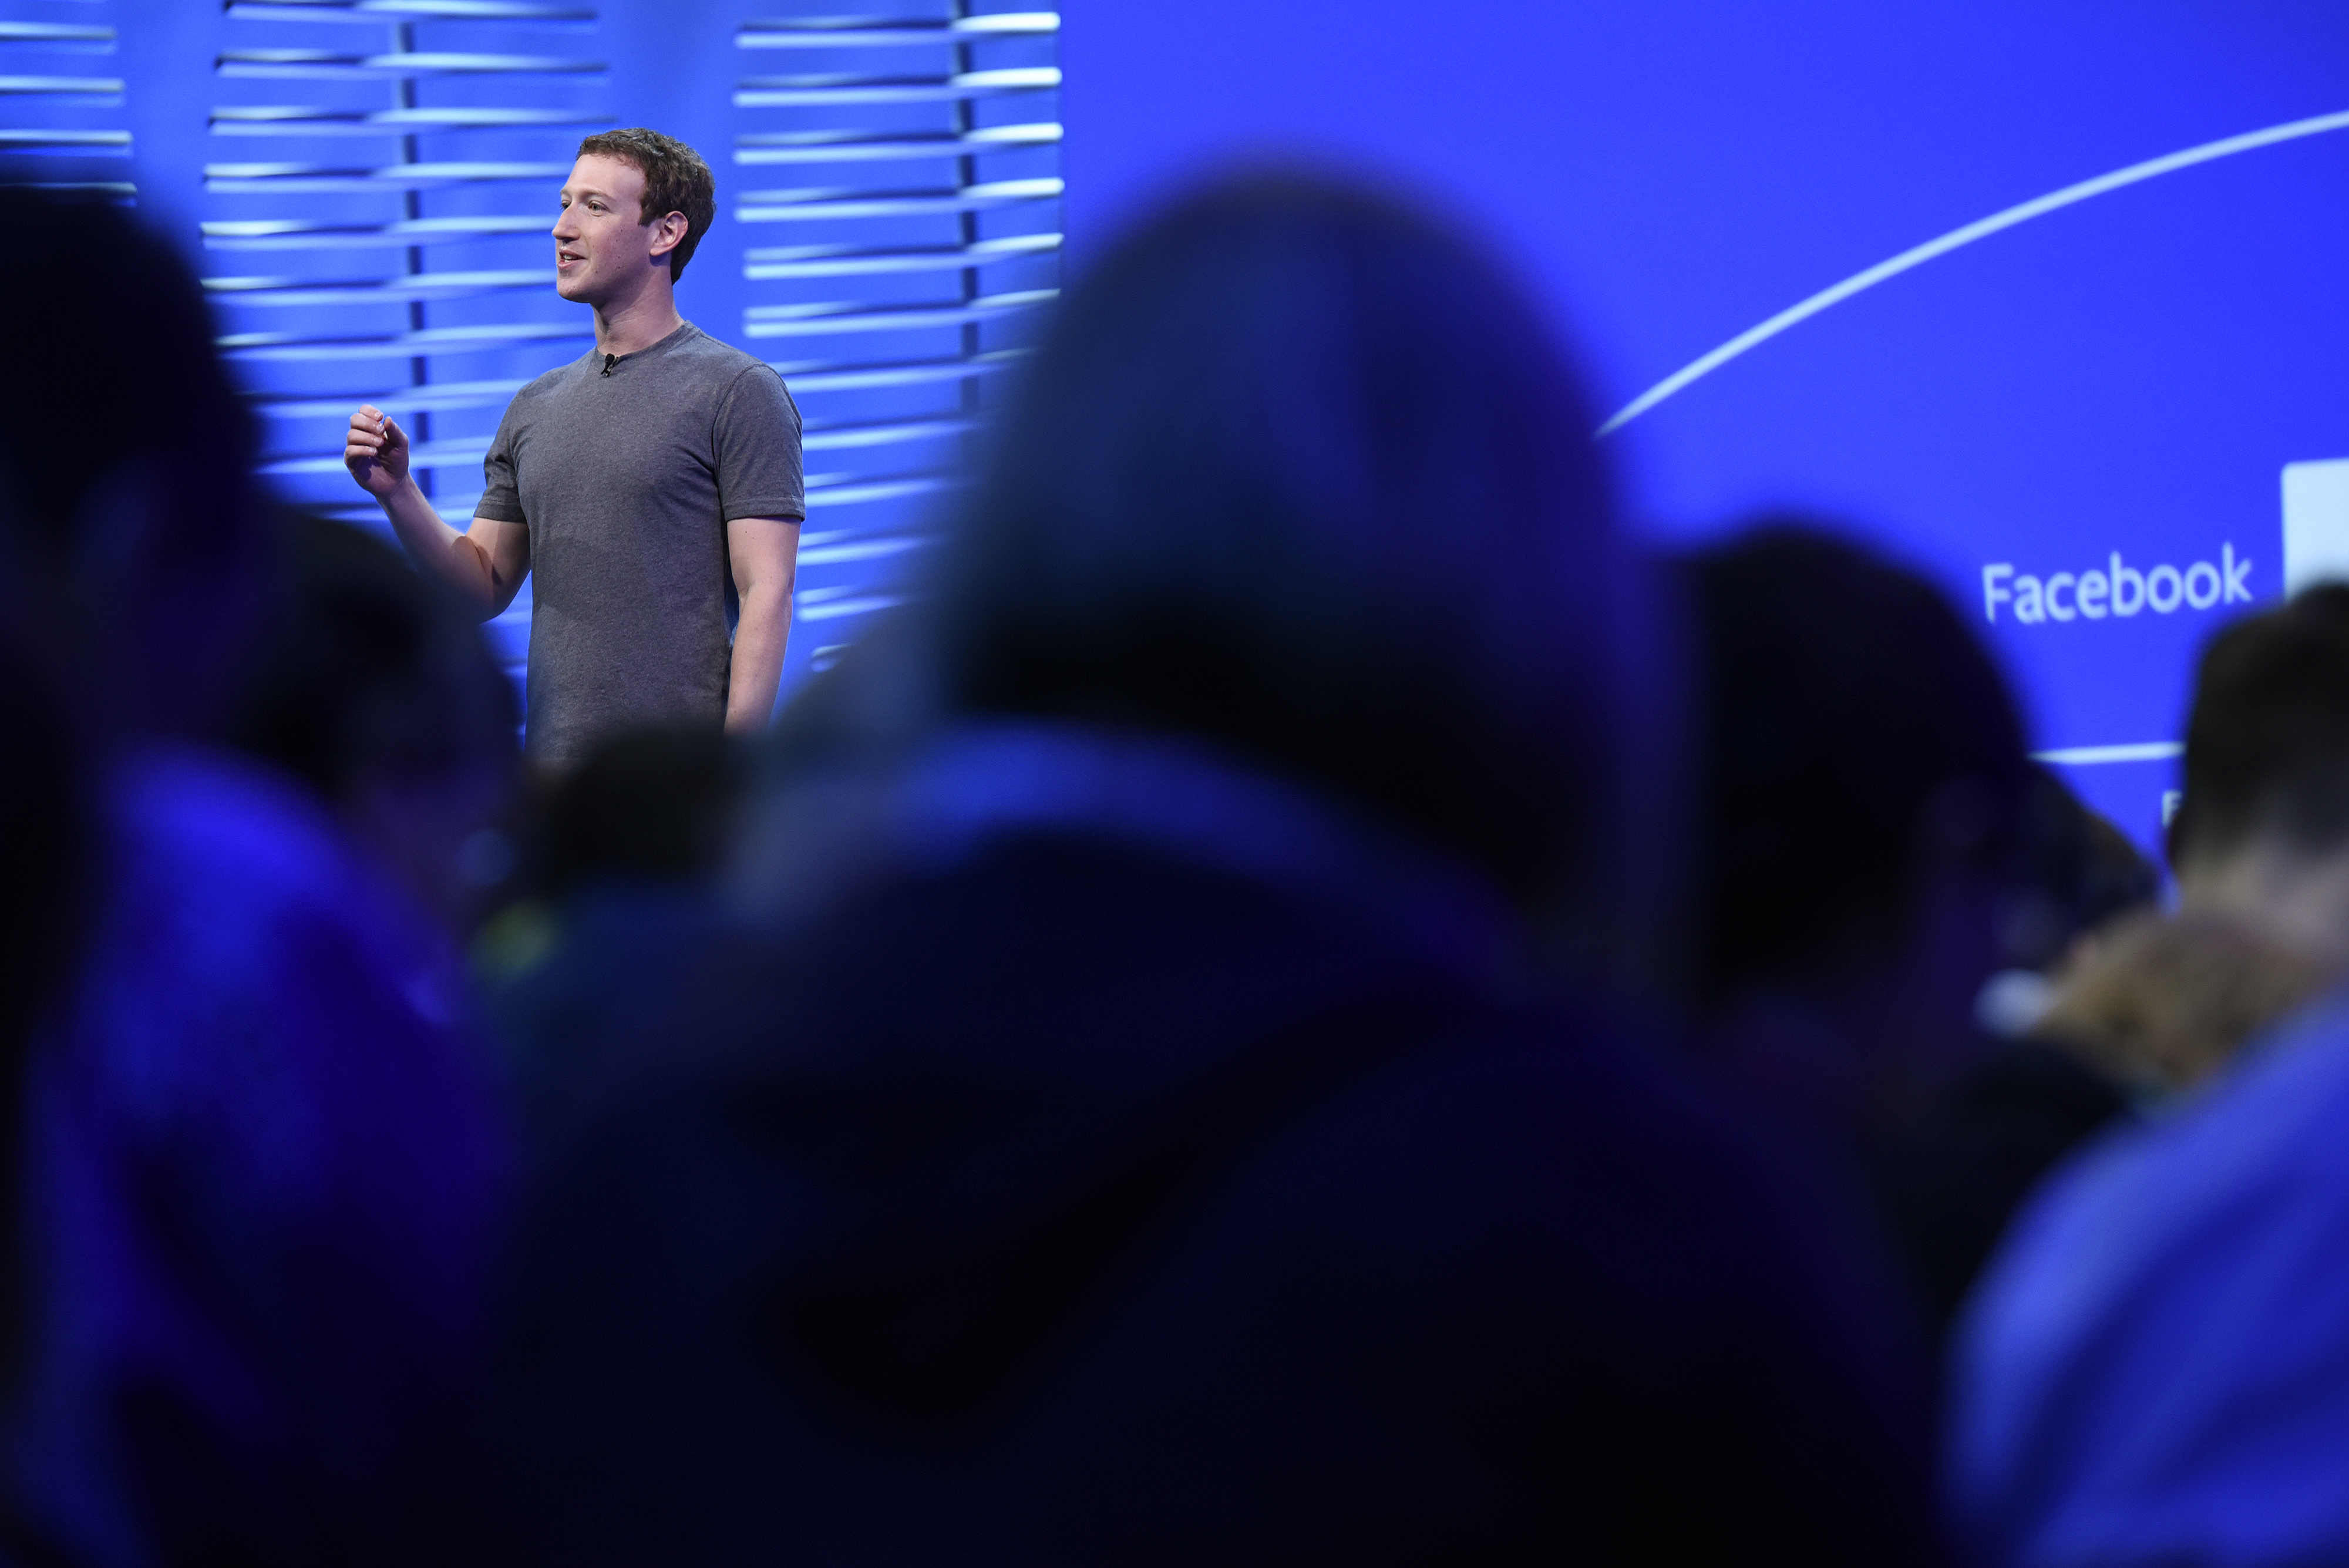 Mark Zuckerberg, founder and chief executive officer of Facebook Inc., speaks during the Facebook F8 Developers Conference in San Francisco, California, U.S., on Tuesday, April 12, 2016. Zuckerberg outlined a 10-year plan to alter the way people interact with each other and the brands that keep advertising dollars rolling at the world's largest social network. (Photograph by Michael Short—Getty/Bloomberg)